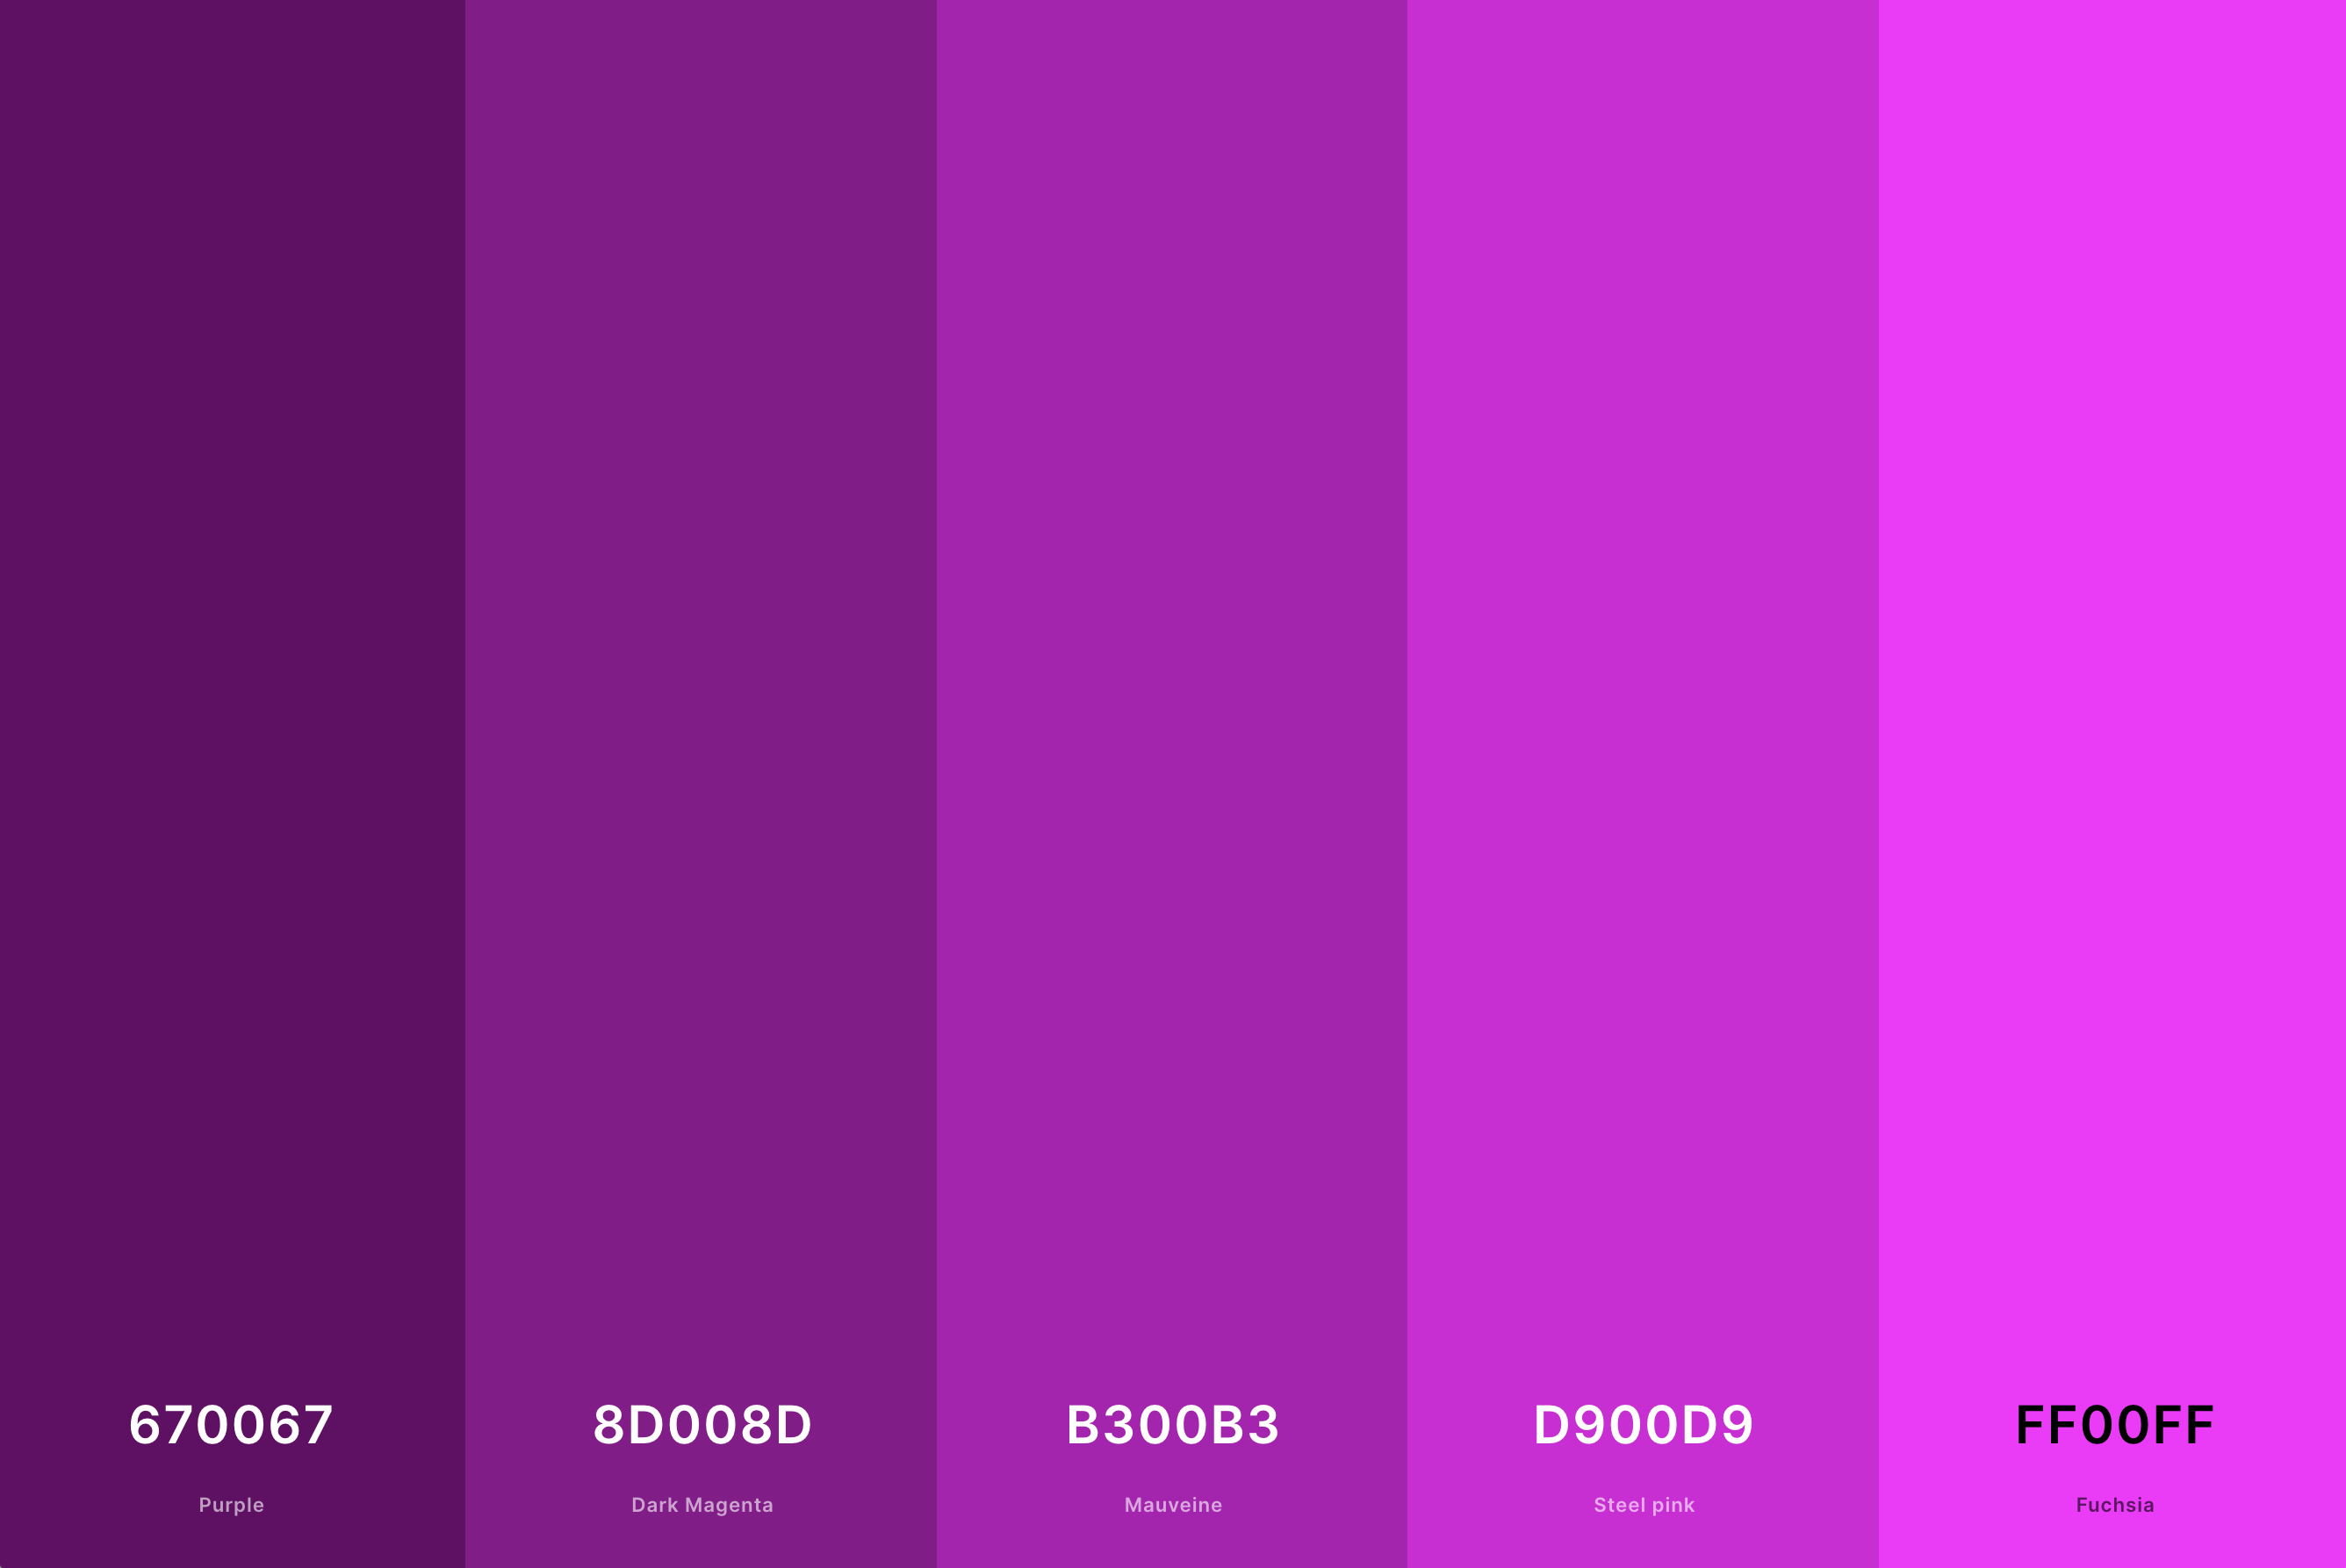 10. Shades Of Magenta Color Palette Color Palette with Purple (Hex #670067) + Dark Magenta (Hex #8D008D) + Mauveine (Hex #B300B3) + Steel Pink (Hex #D900D9) + Magenta (Hex #FF00FF) Color Palette with Hex Codes